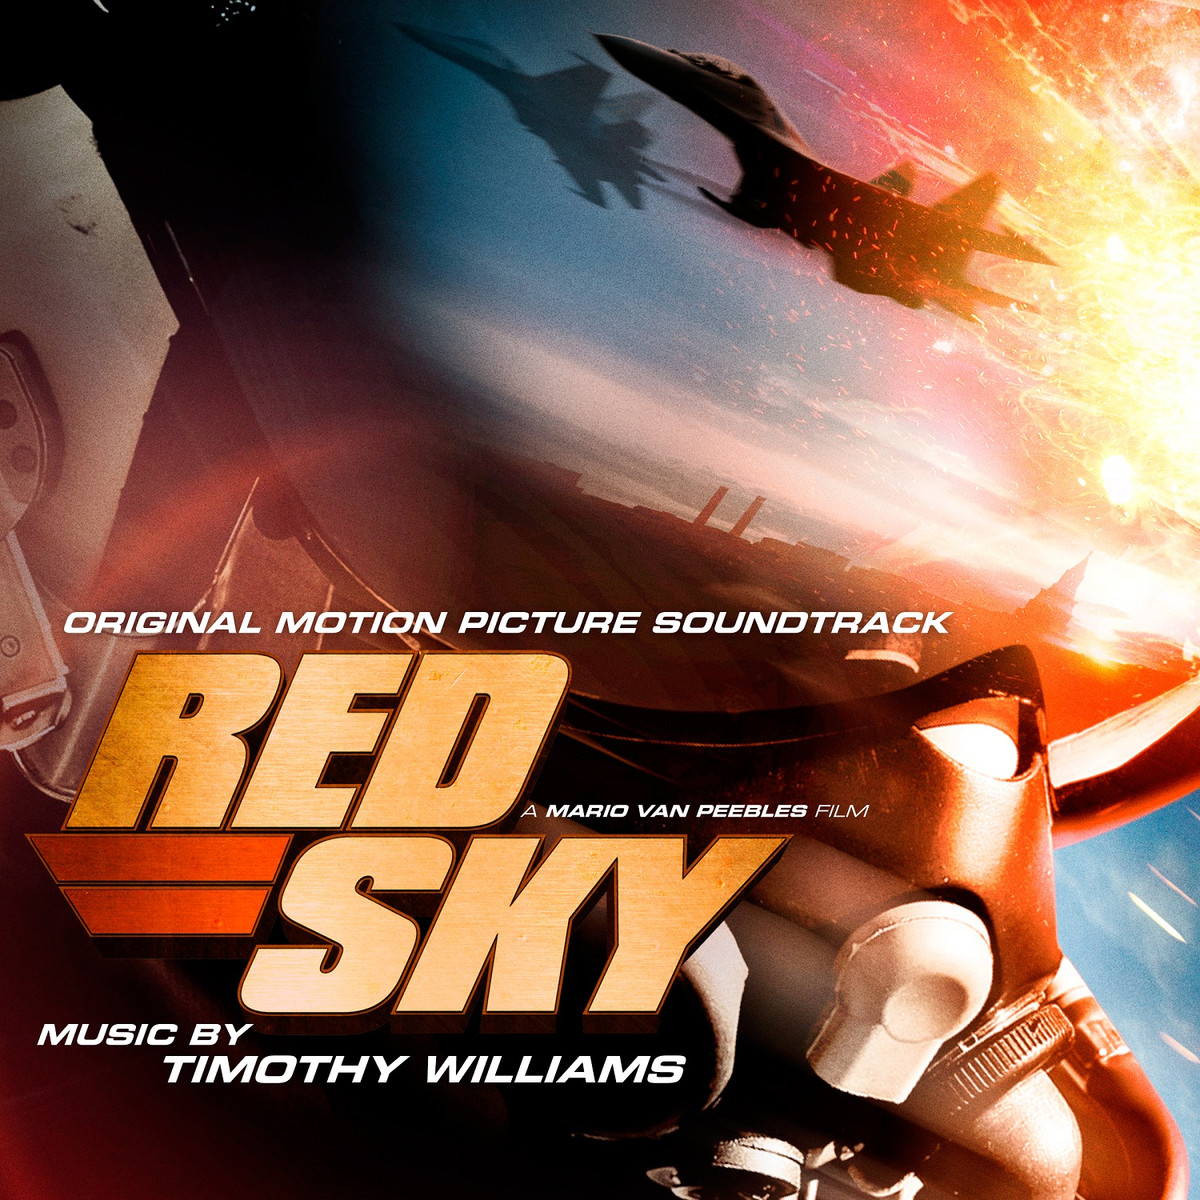 Red OST. Red Sky Music. Speed 2: Cruise Control - Original Motion picture Soundtrack. Dune (Original Motion picture Soundtrack). Небо слушать саундтреки